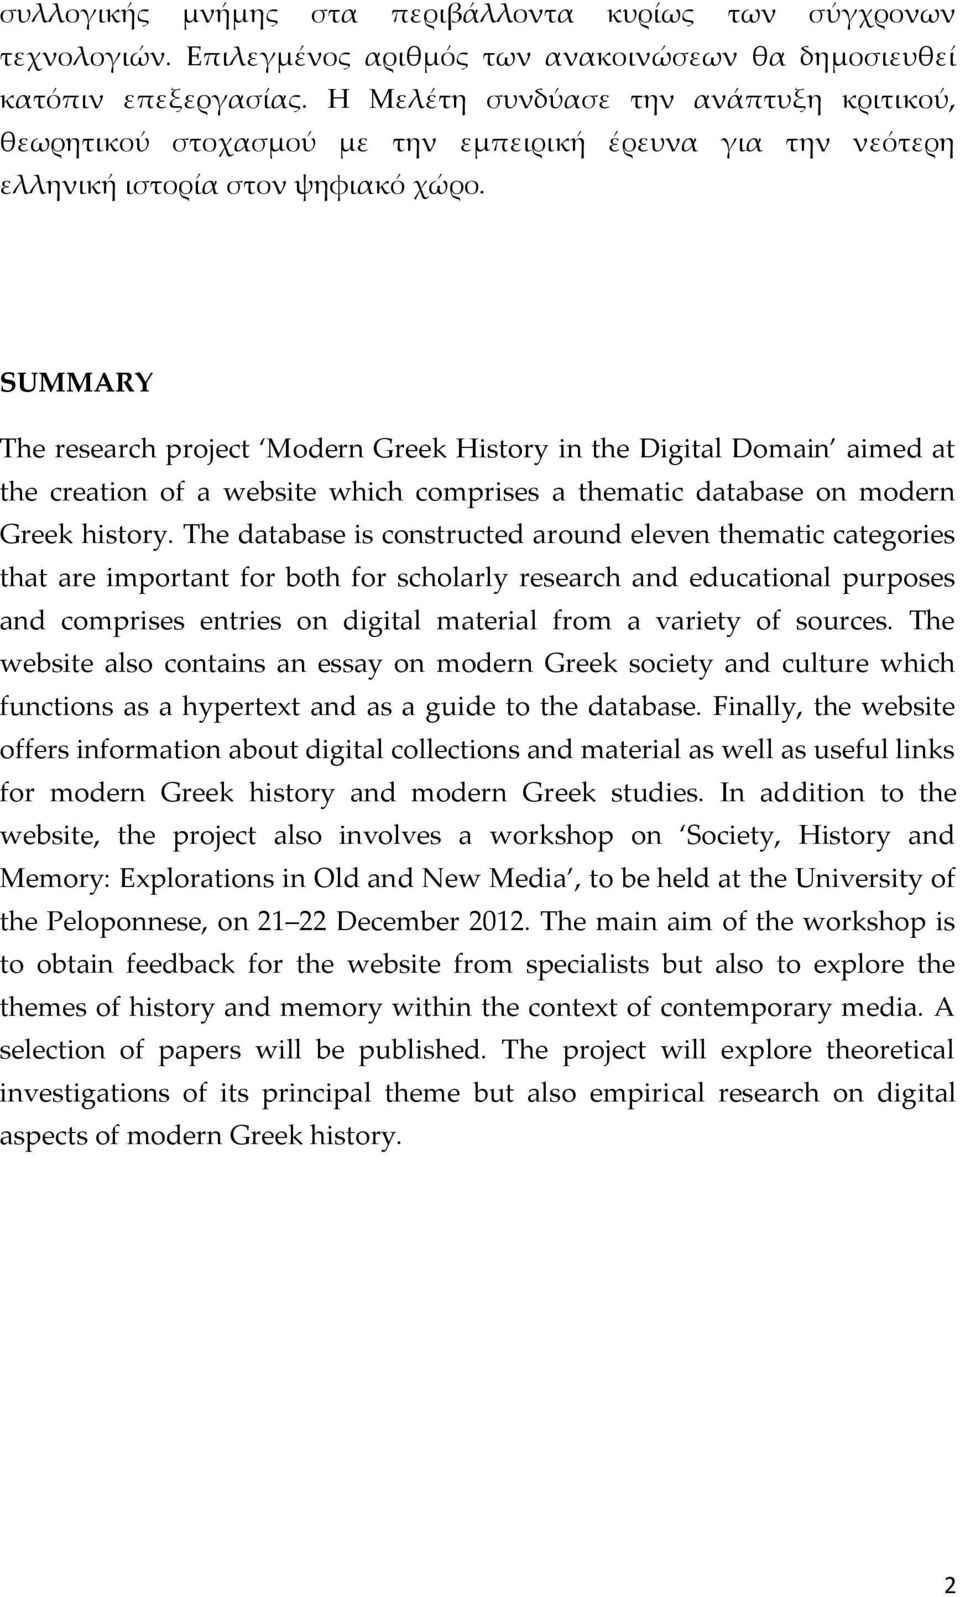 SUMMARY The research project Modern Greek History in the Digital Domain aimed at the creation of a website which comprises a thematic database on modern Greek history.